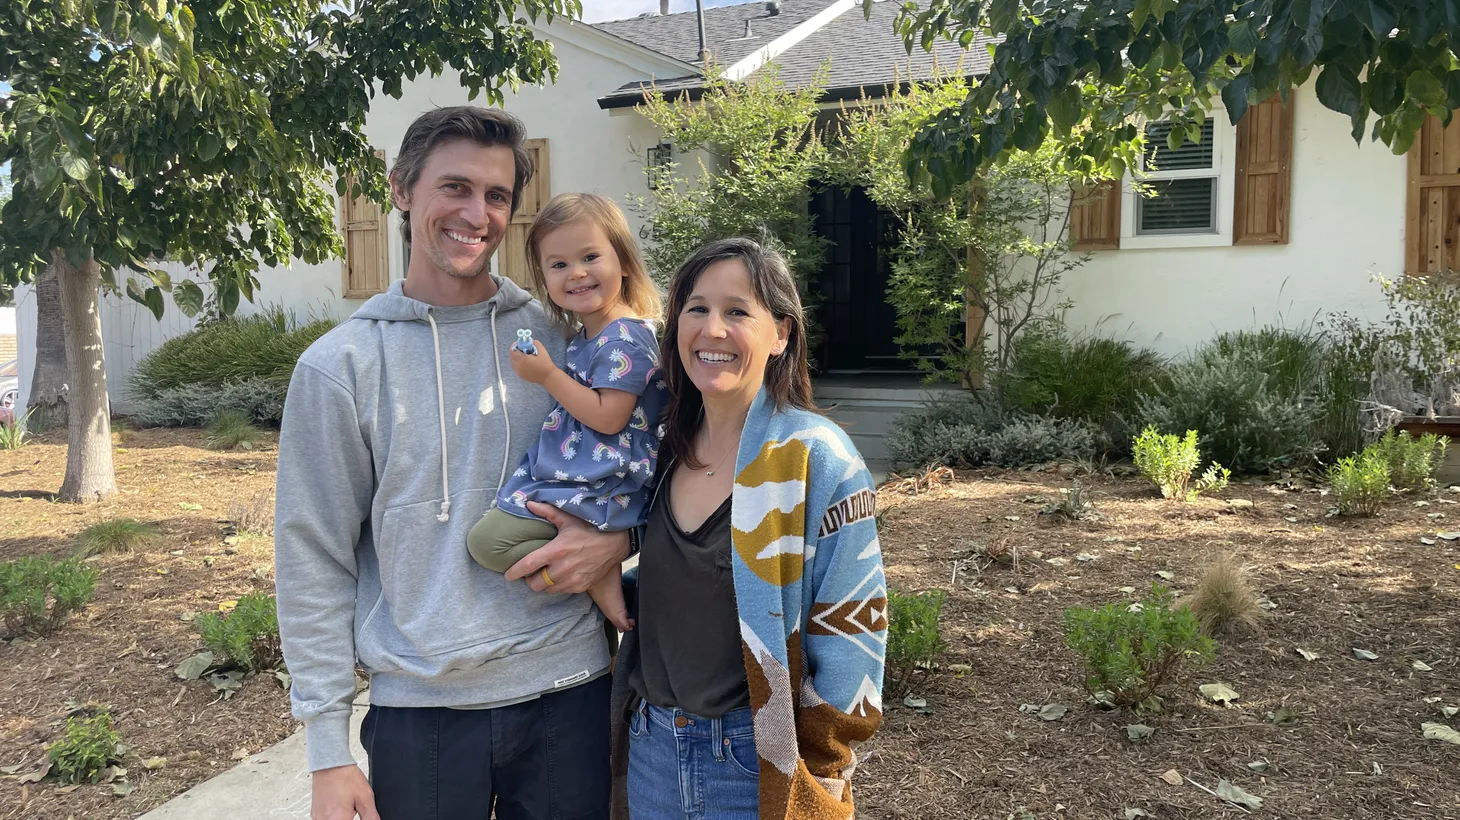 The Canoga Park household of Jake Olson, Amy Ball and their daughter Scout was one of 15 selected to get retrofitted as part of a water conservation pilot project.